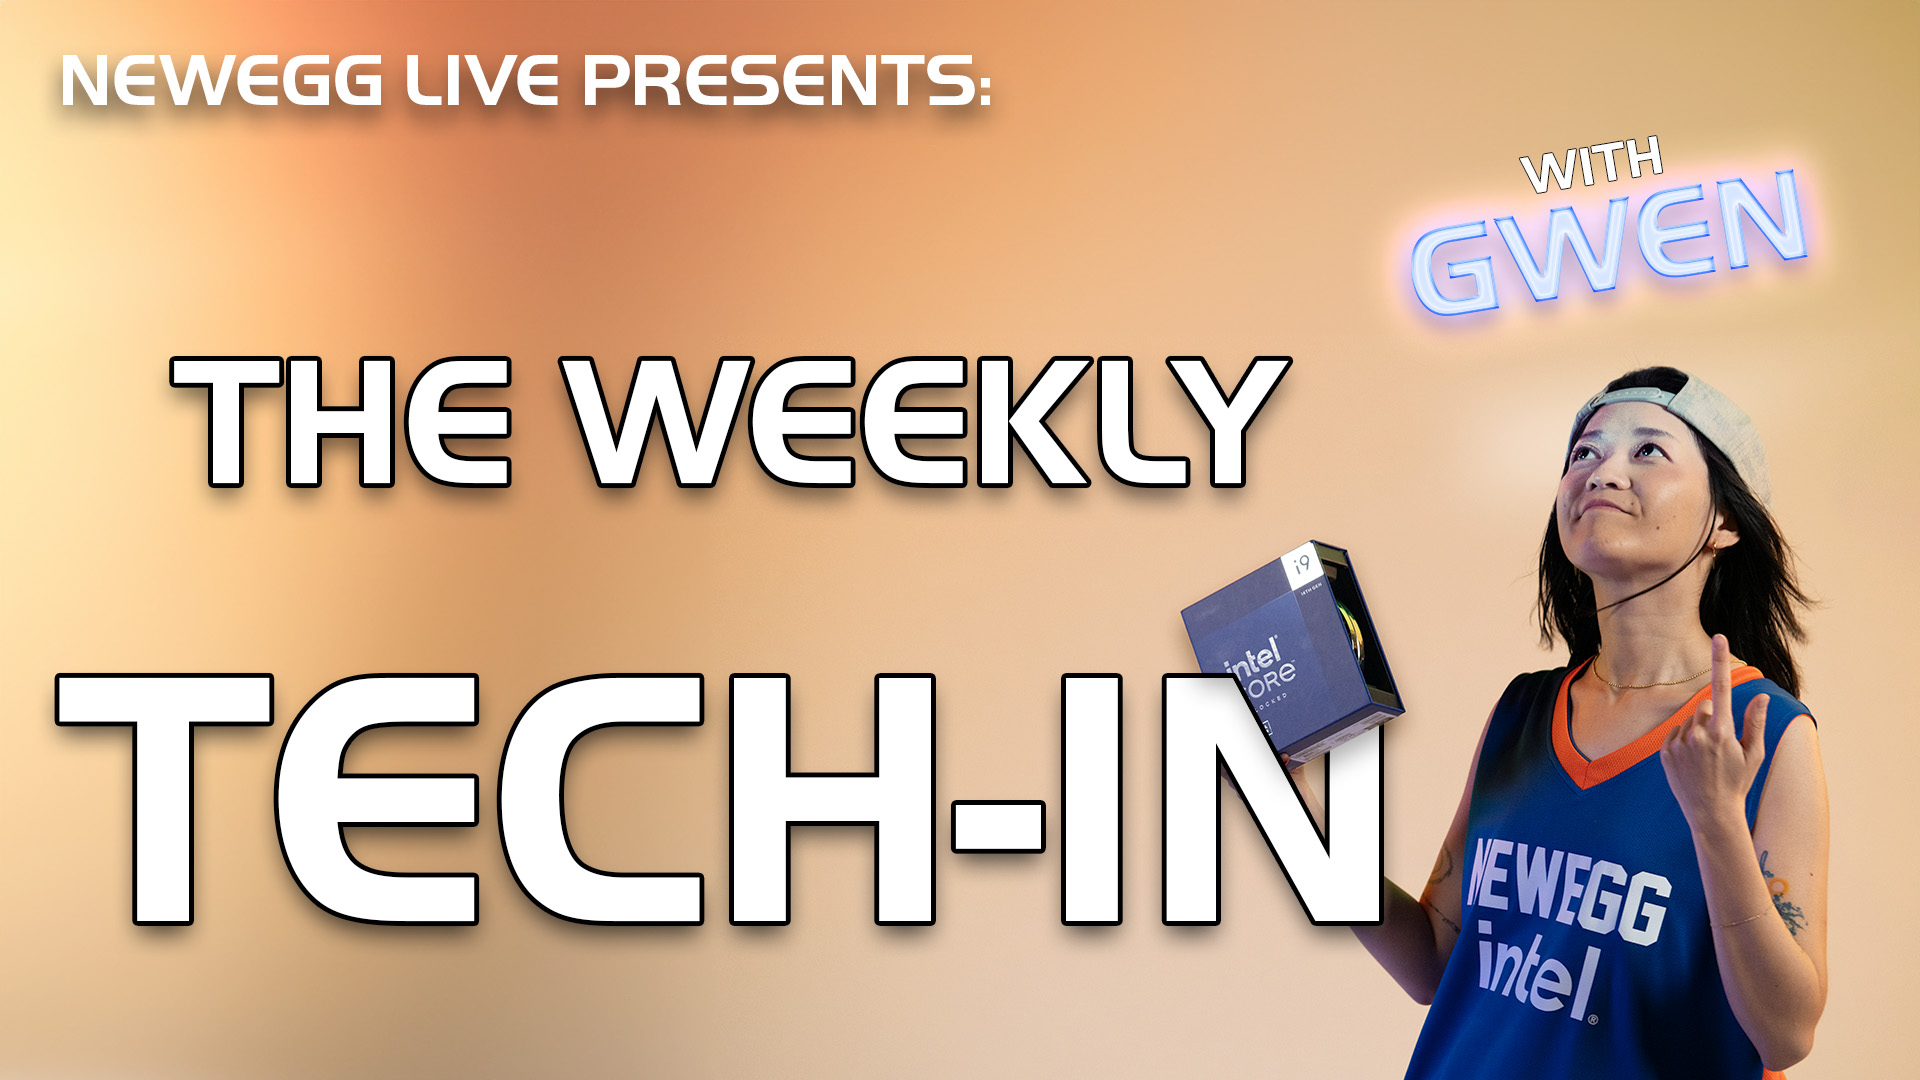 Newegg Live: Weekly Tech-in!